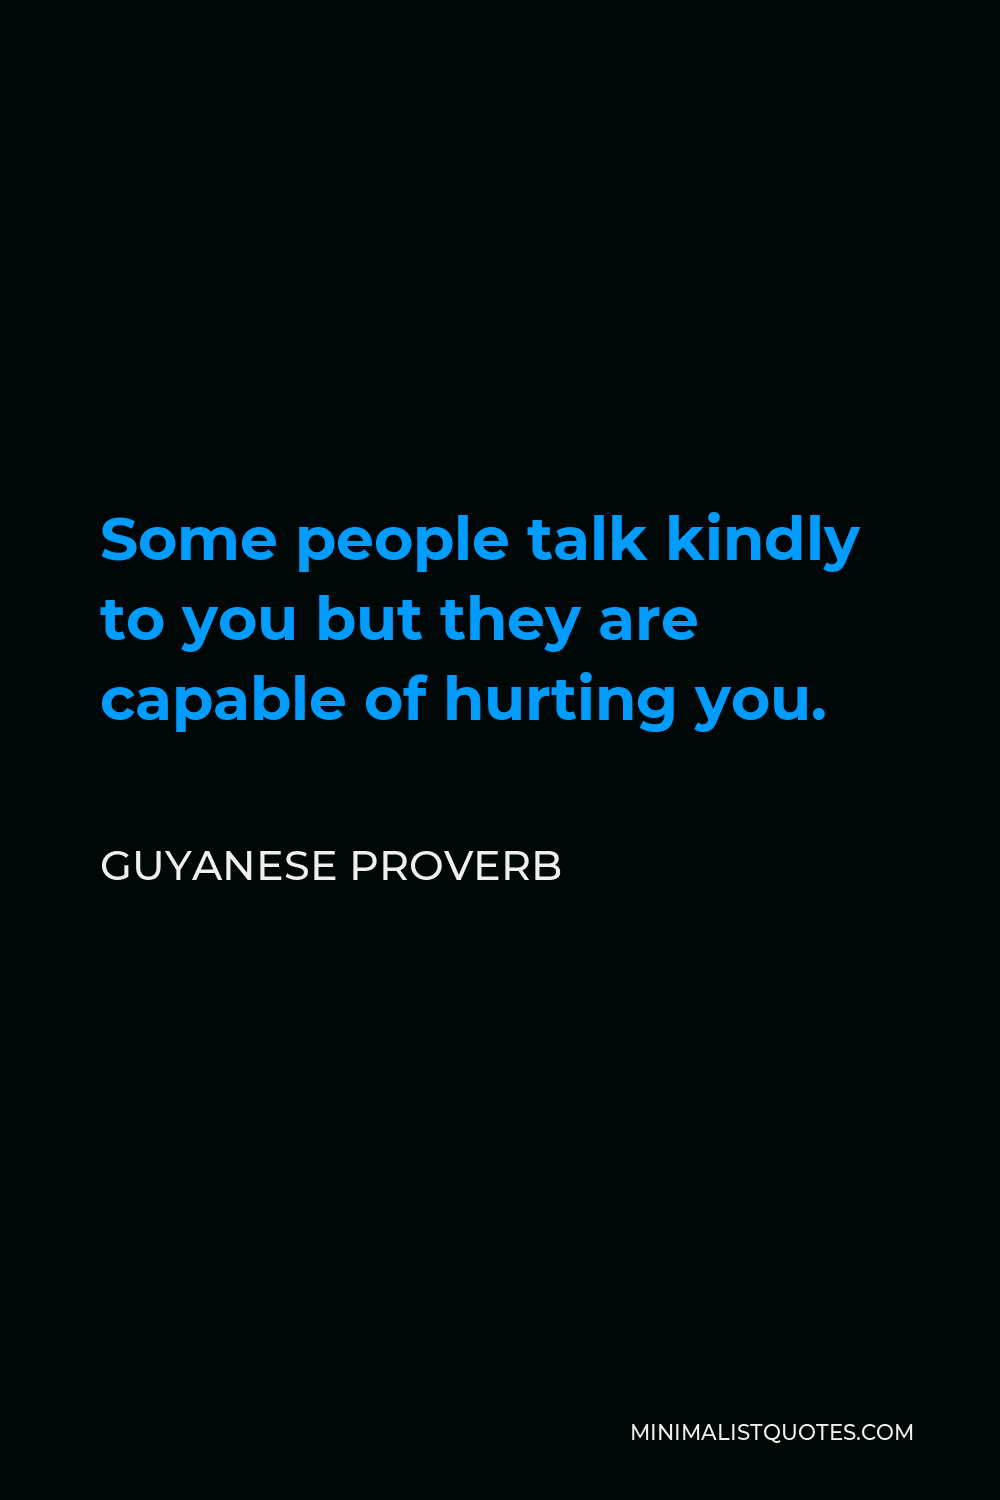 Guyanese Proverb Quote - Some people talk kindly to you but they are capable of hurting you.